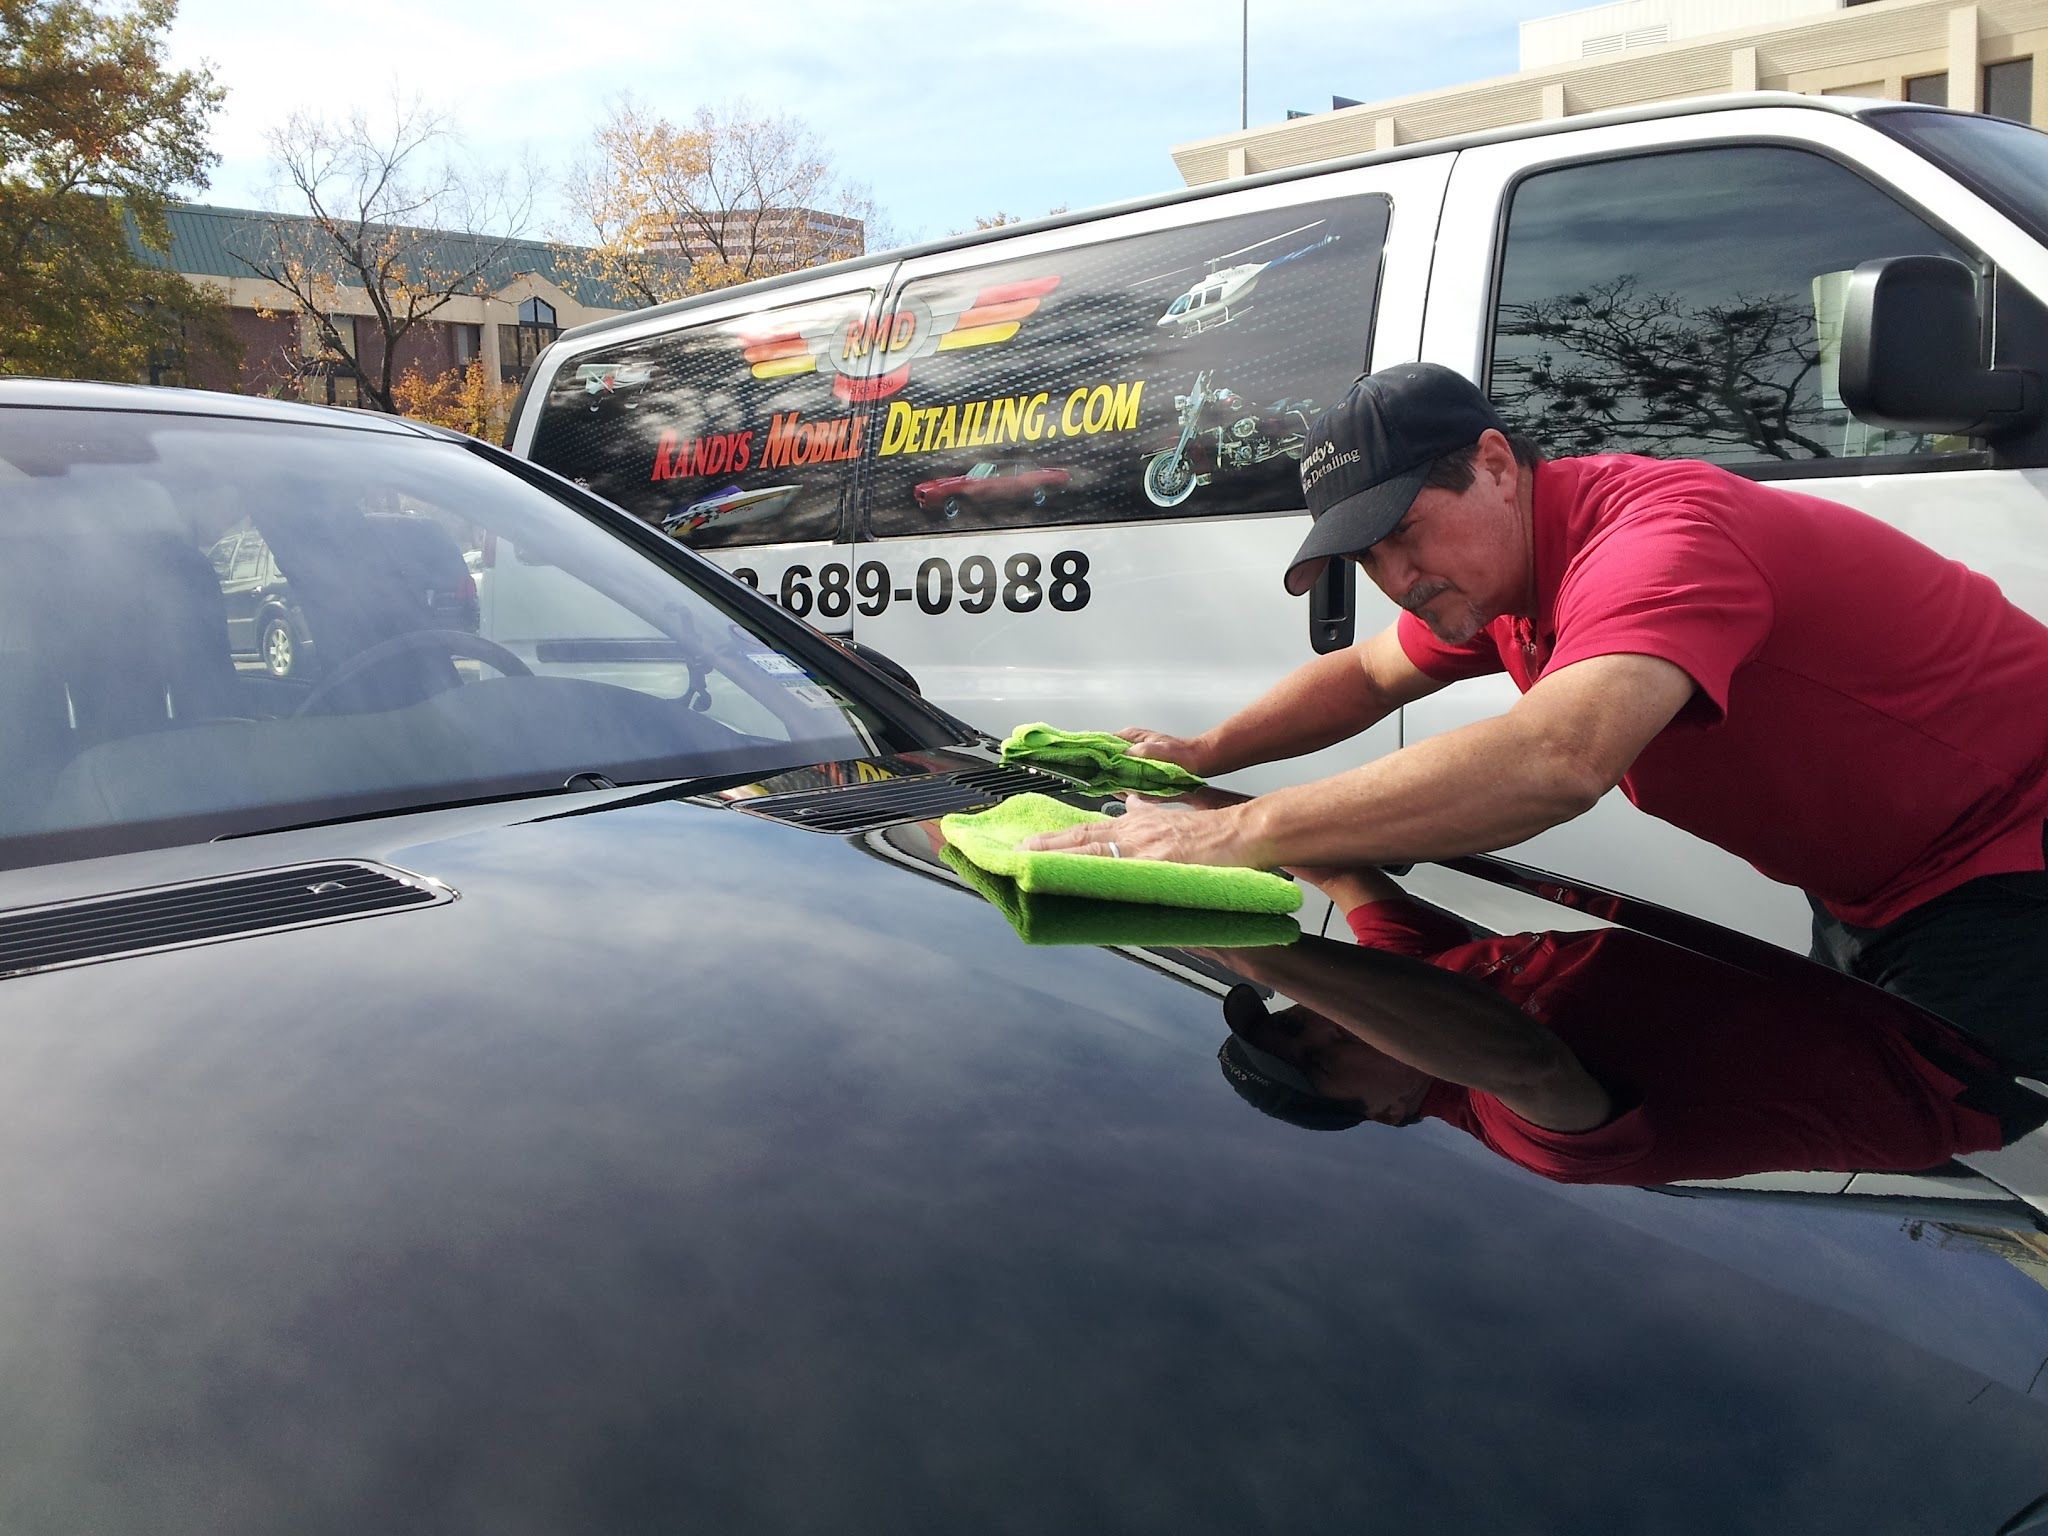 Services & Products Randys Mobile Detailing in Kingwood TX